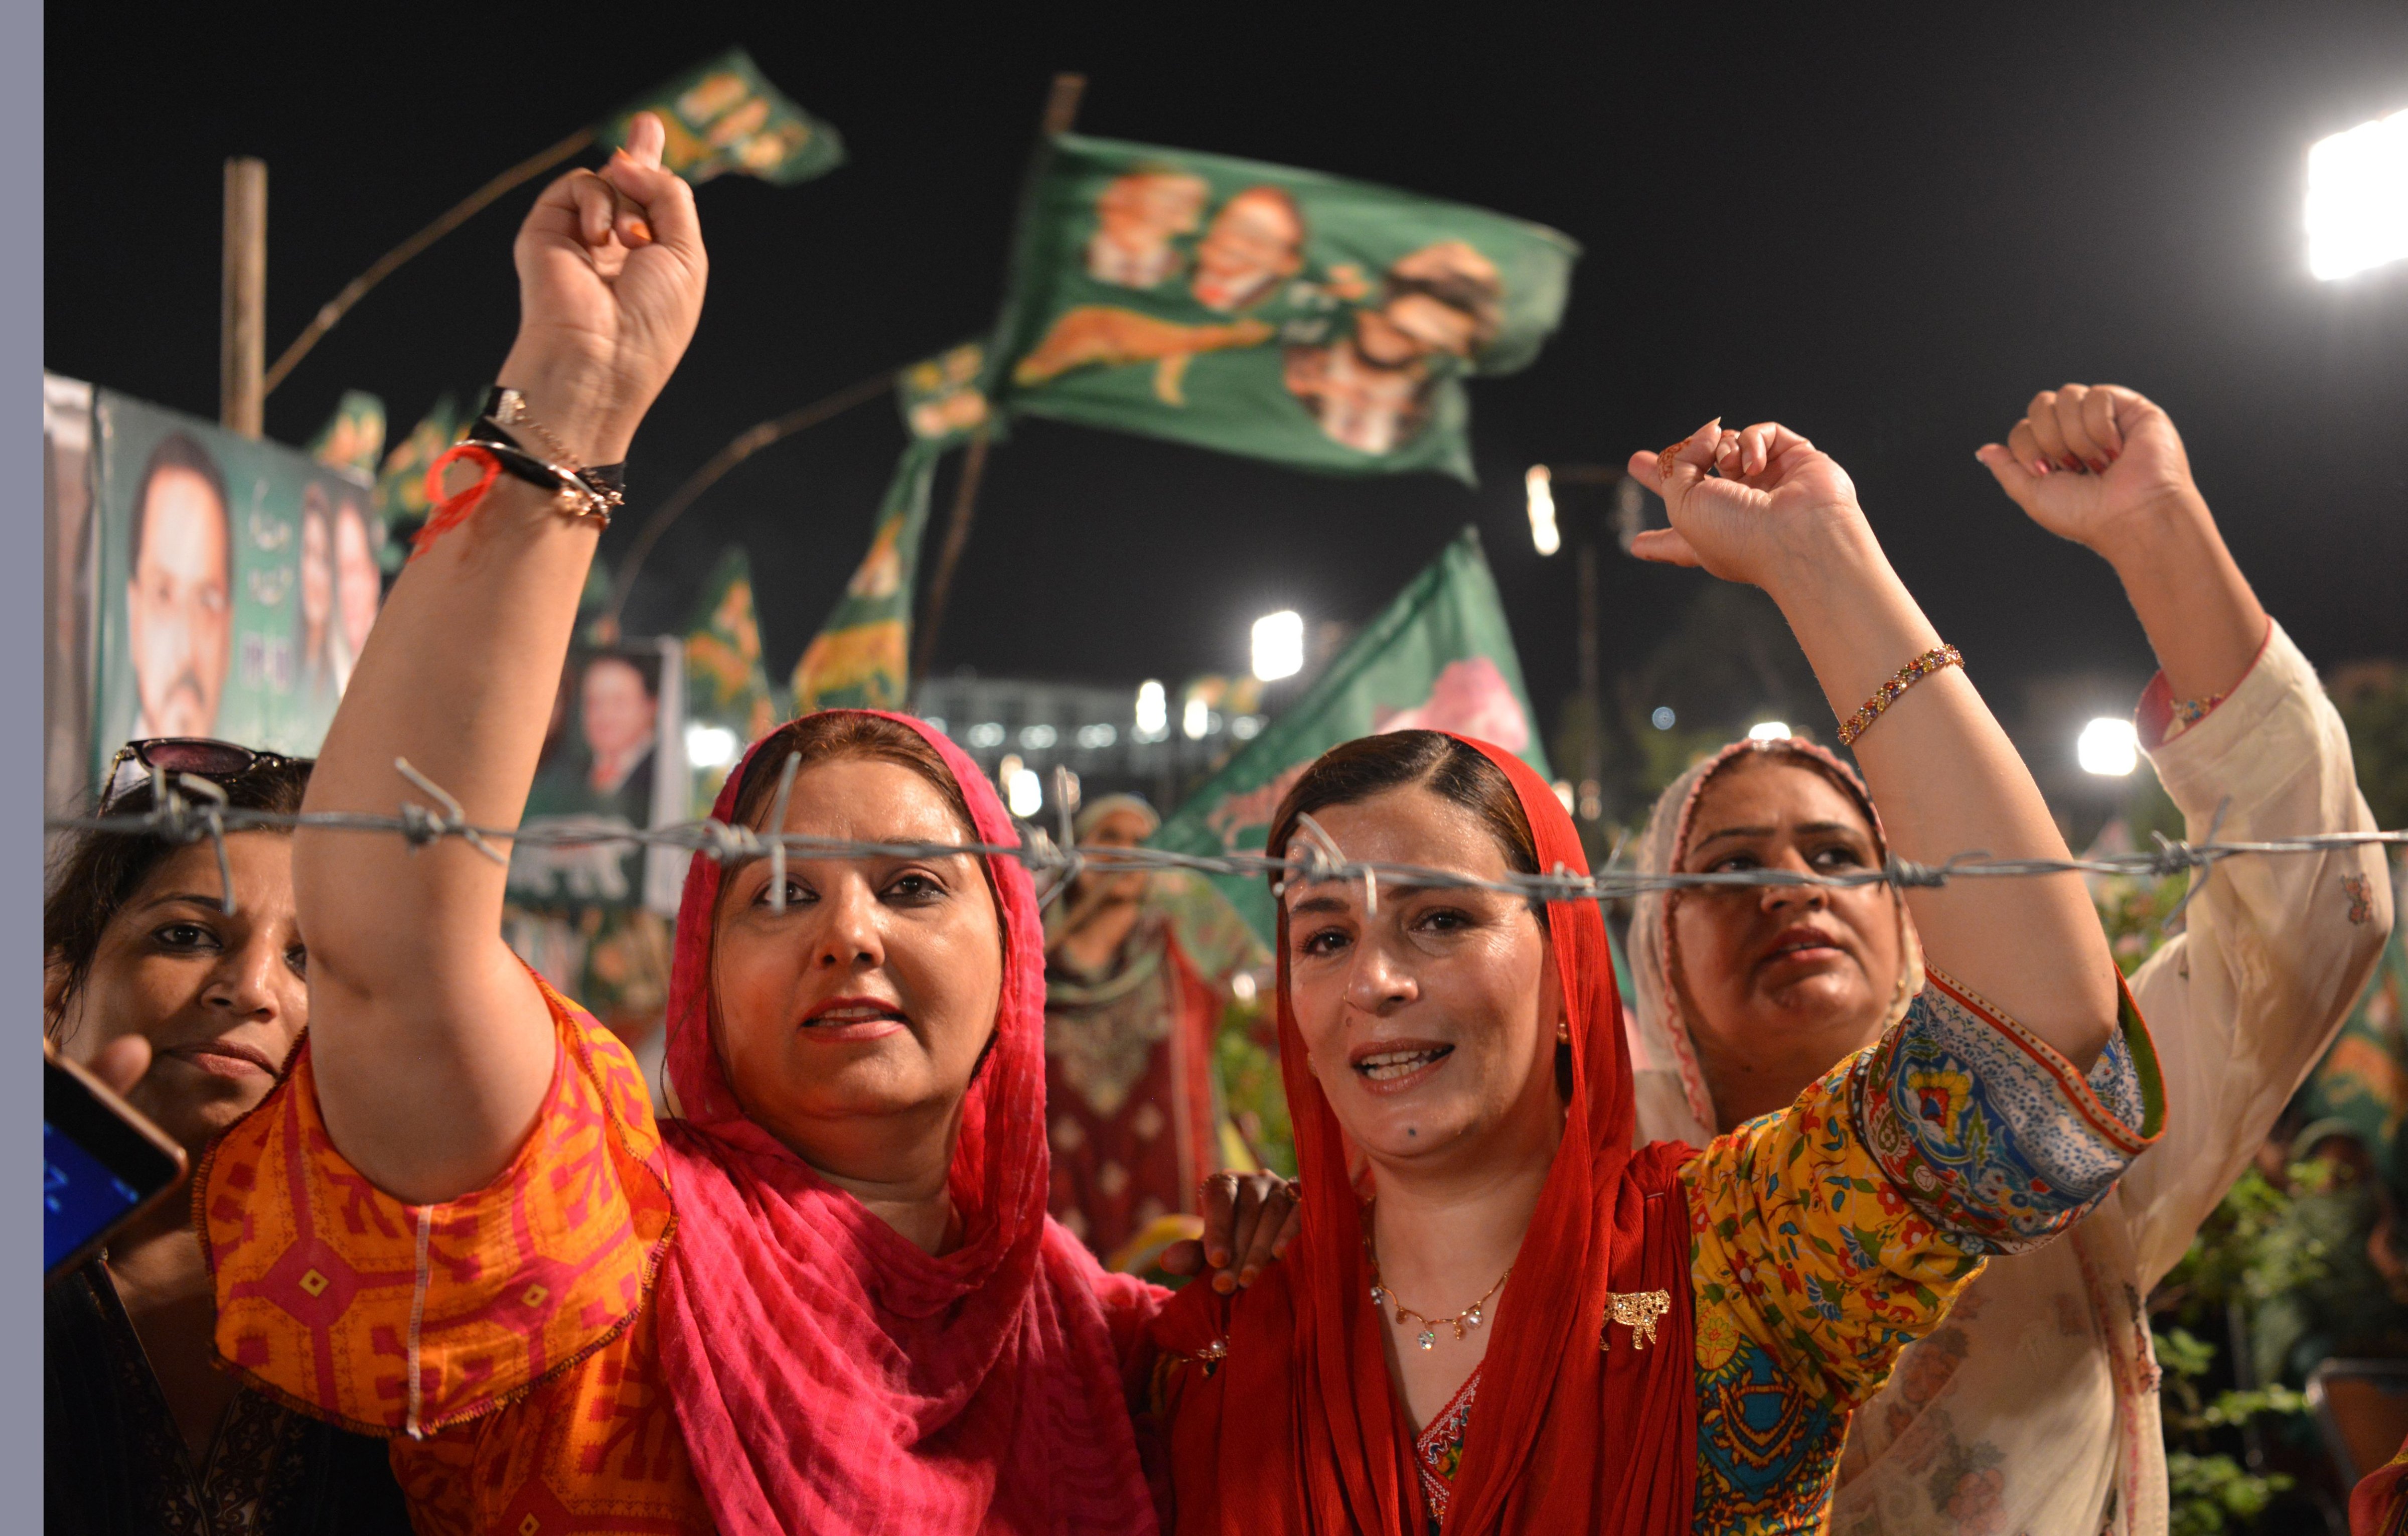 Supporters of Shahbaz Sharif, the younger brother of former Pakistani Prime Minister Nawaz Sharif and head of the Pakistan Muslim League-Nawaz (PML-N), at a campaign meeting ahead of the election in Rawalpindi on July 23, 2018. (Aamir Qureshi—AFP/Getty Images)